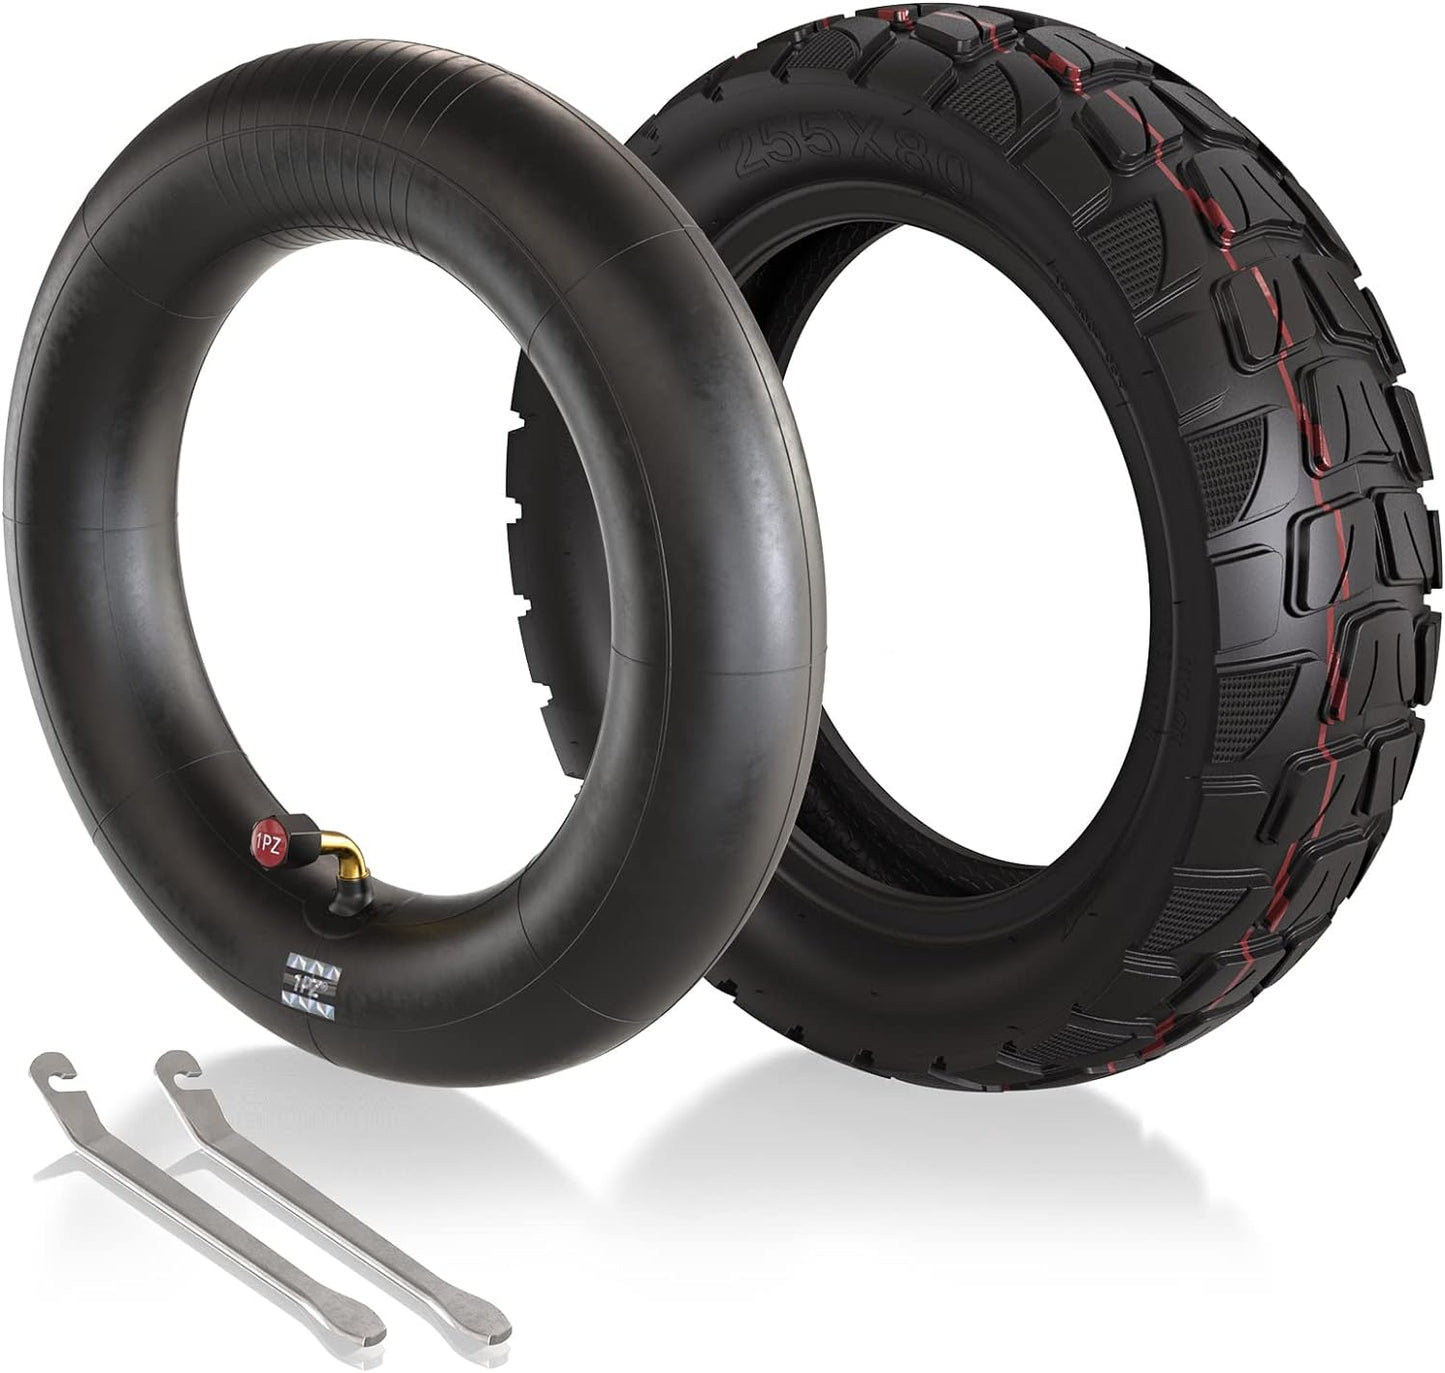 1PZ T06-IN5 255x80 Tire and Inner Tube 10x3.0 Tire Inner Tube Set Replacement for 10 Inch Electric Scooter